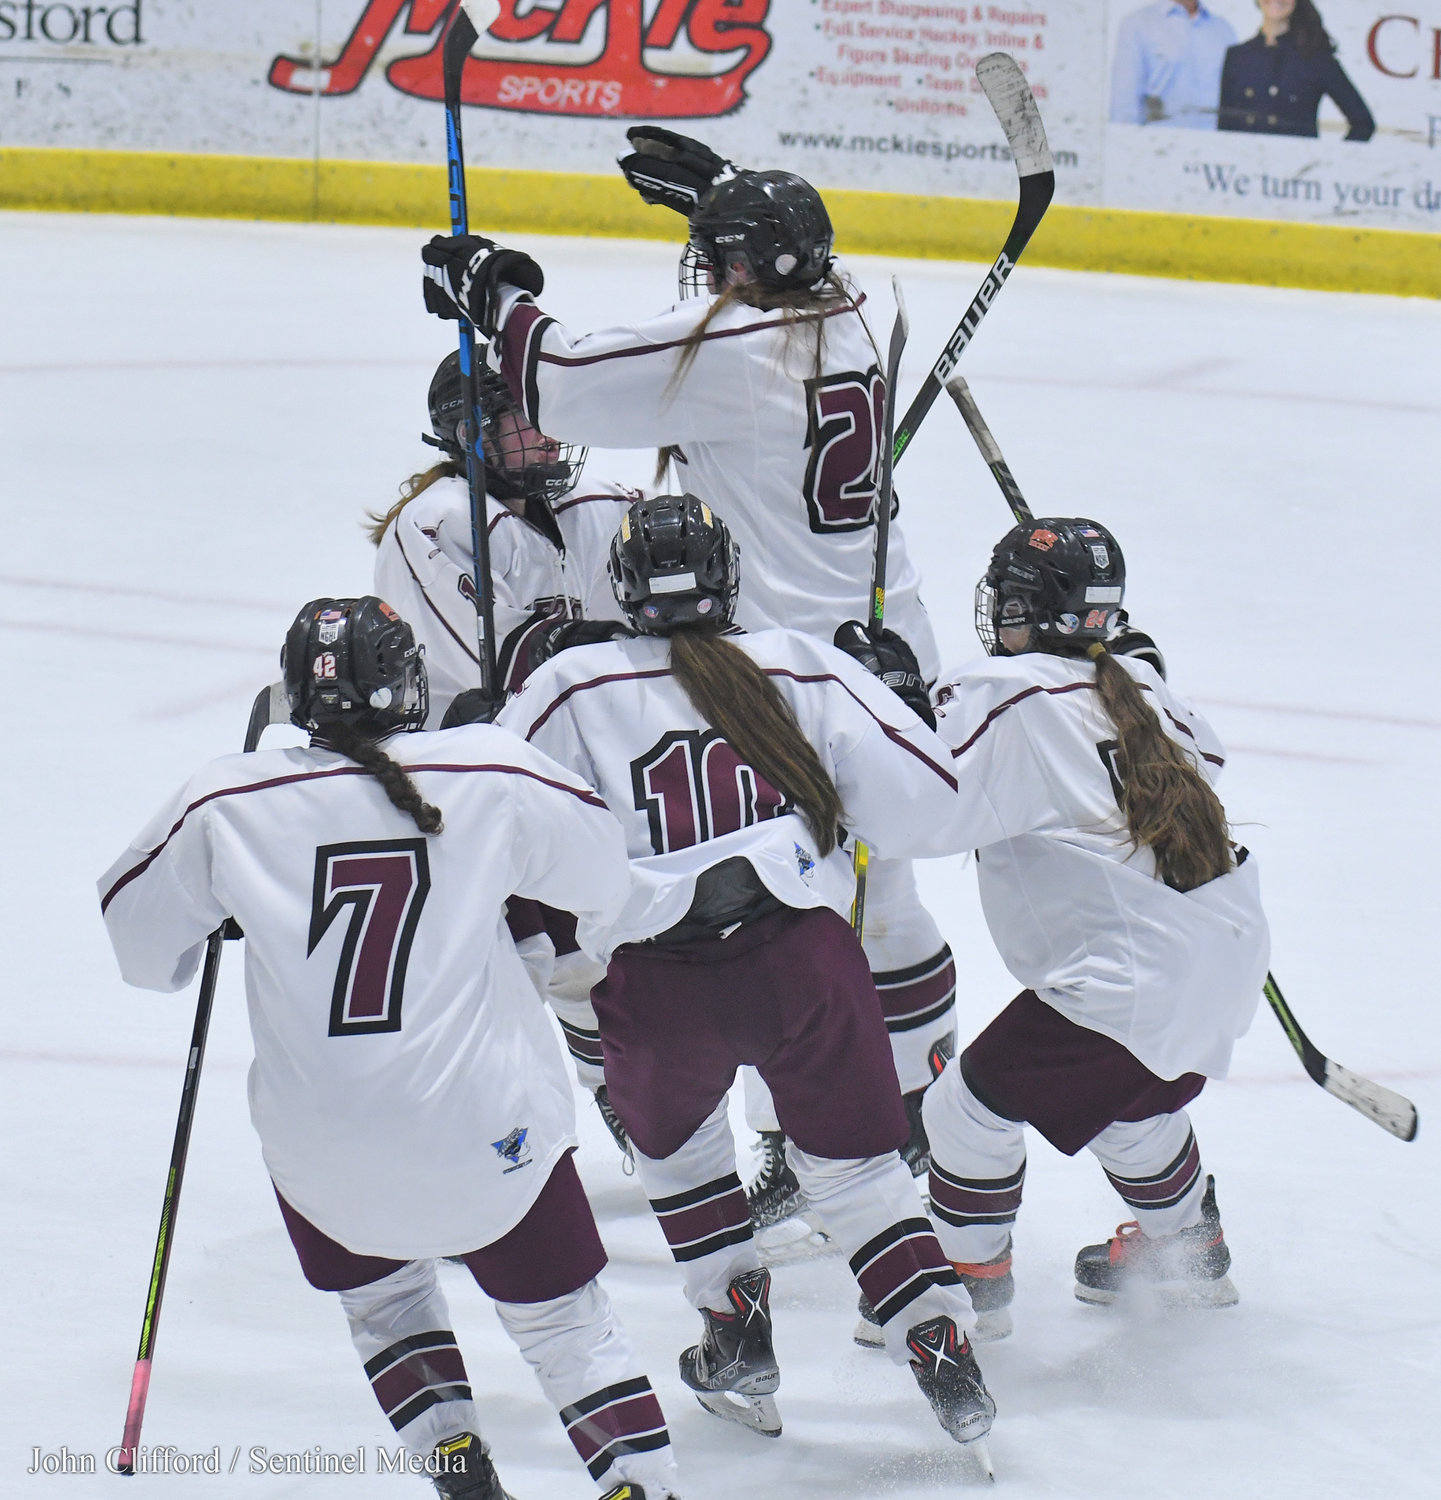 The Clinton Warriors celebrate their Section III girls ice hockey championship Wednesday night in Nedrow. The team beat Skaneateles 1-0 in overtime.